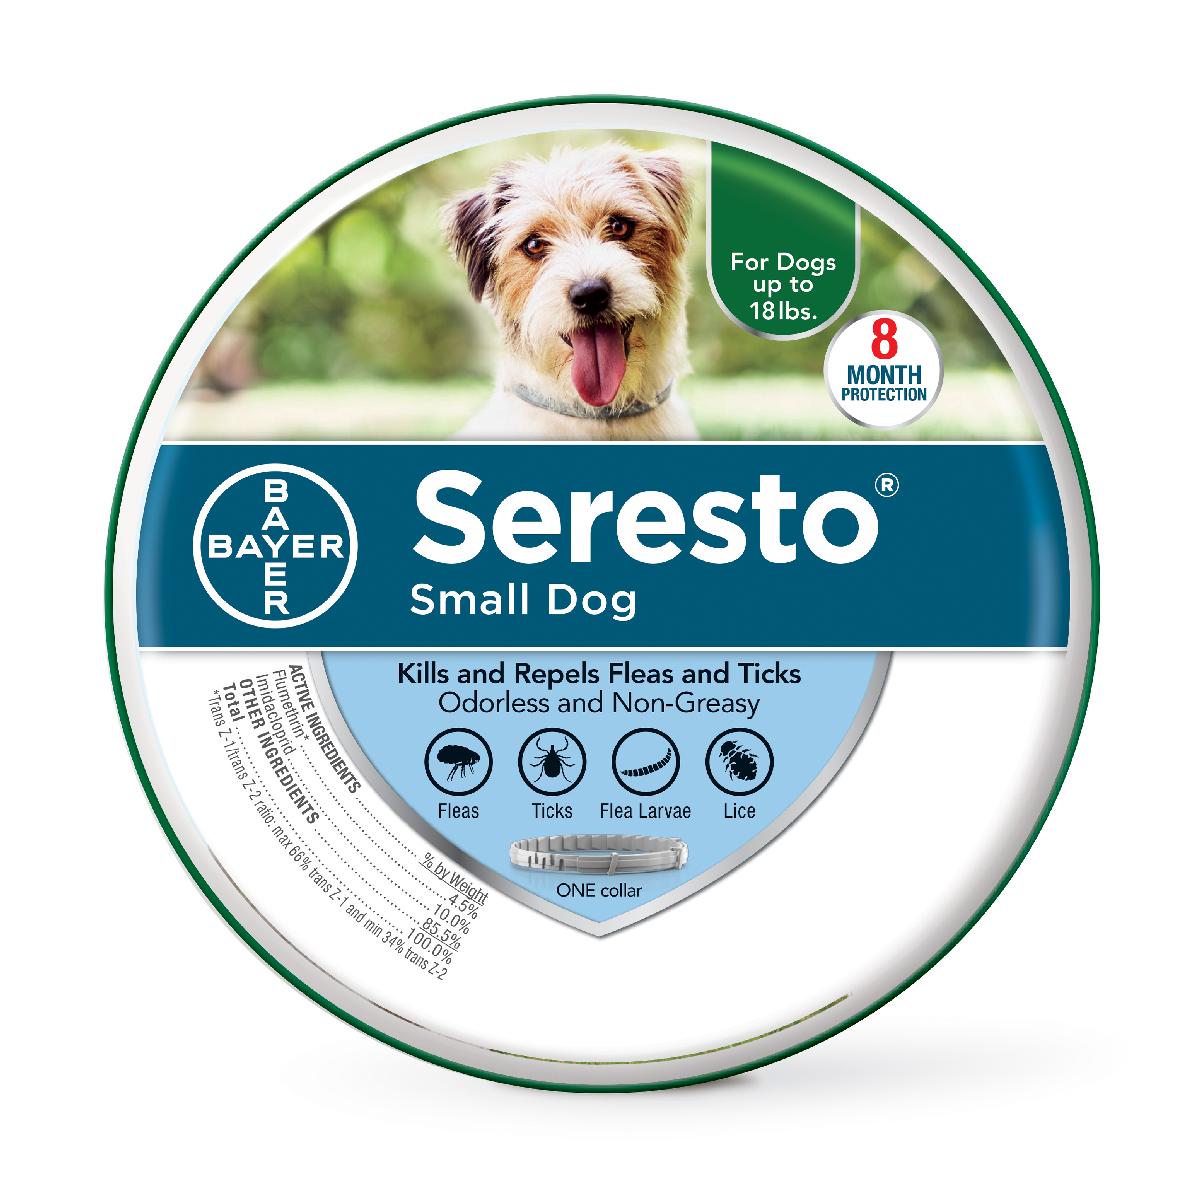 seresto-flea-and-tick-collar-for-small-dogs-8-month-protection-pet